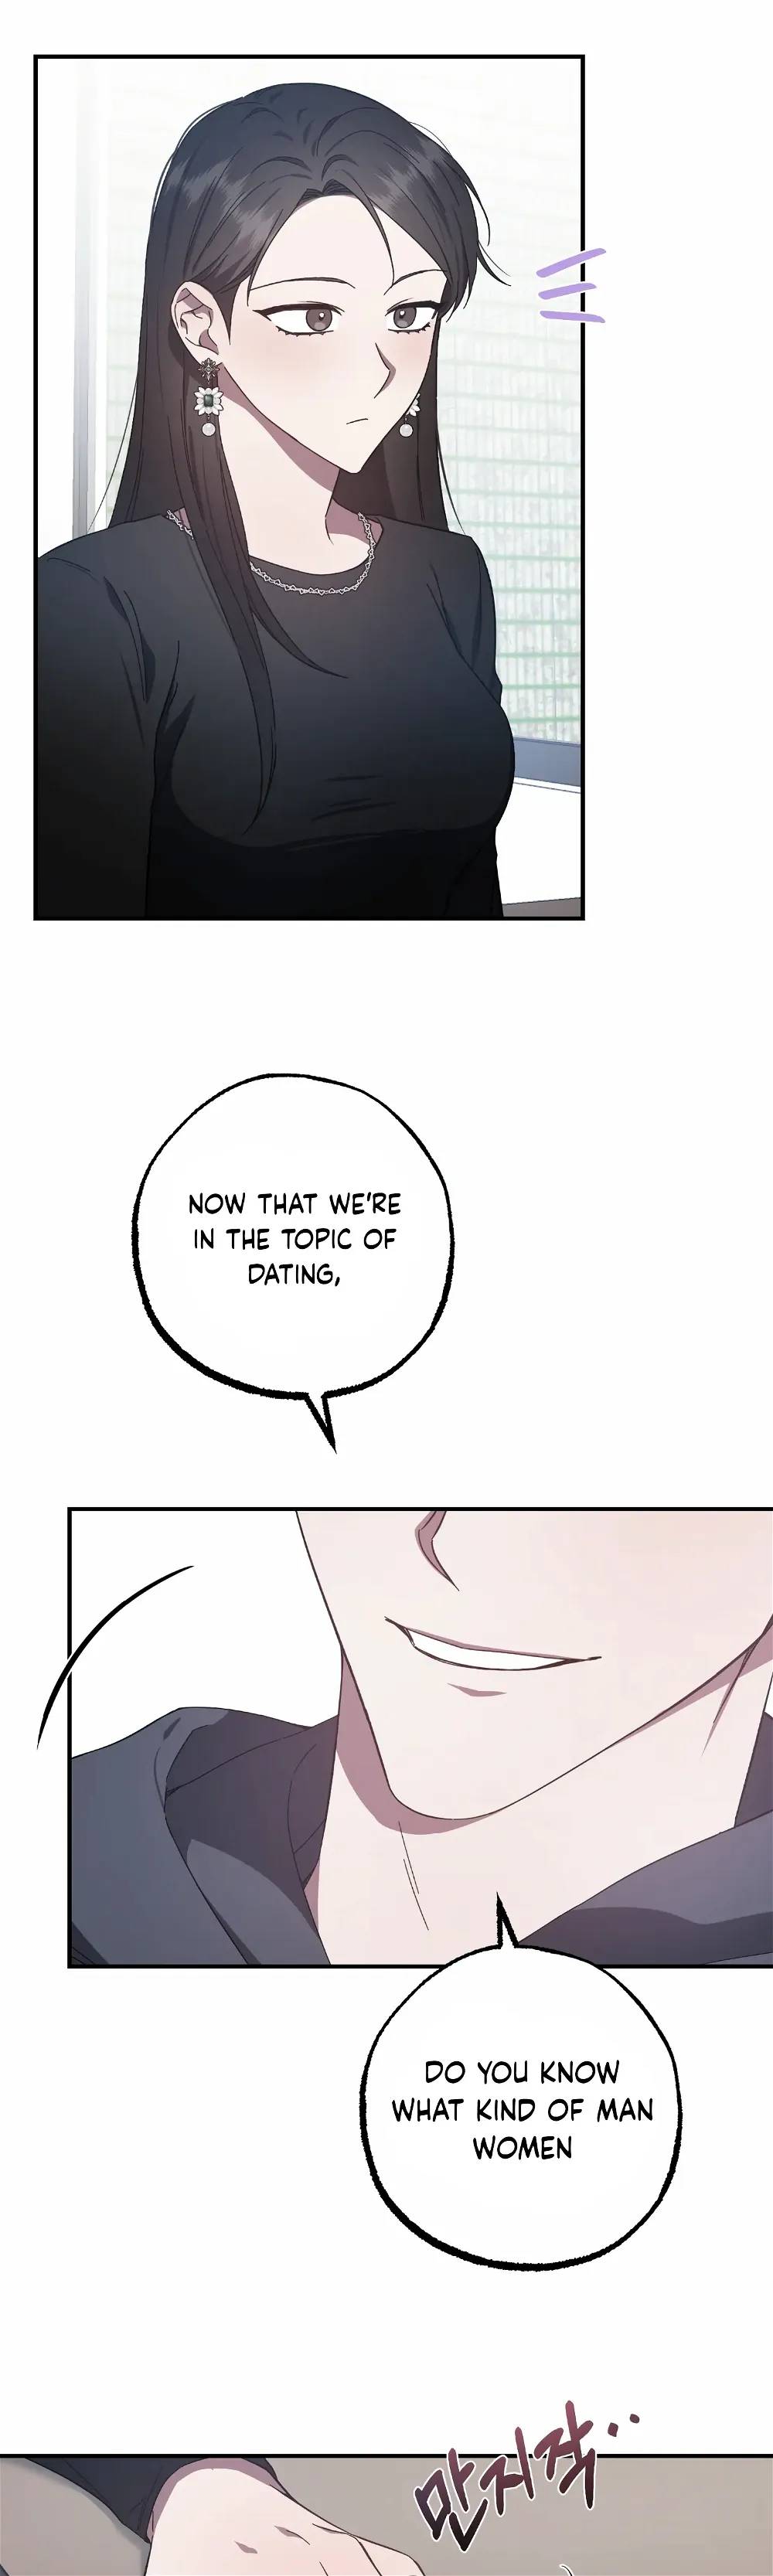 Mijeong’s Relationships chapter 23 - Page 38